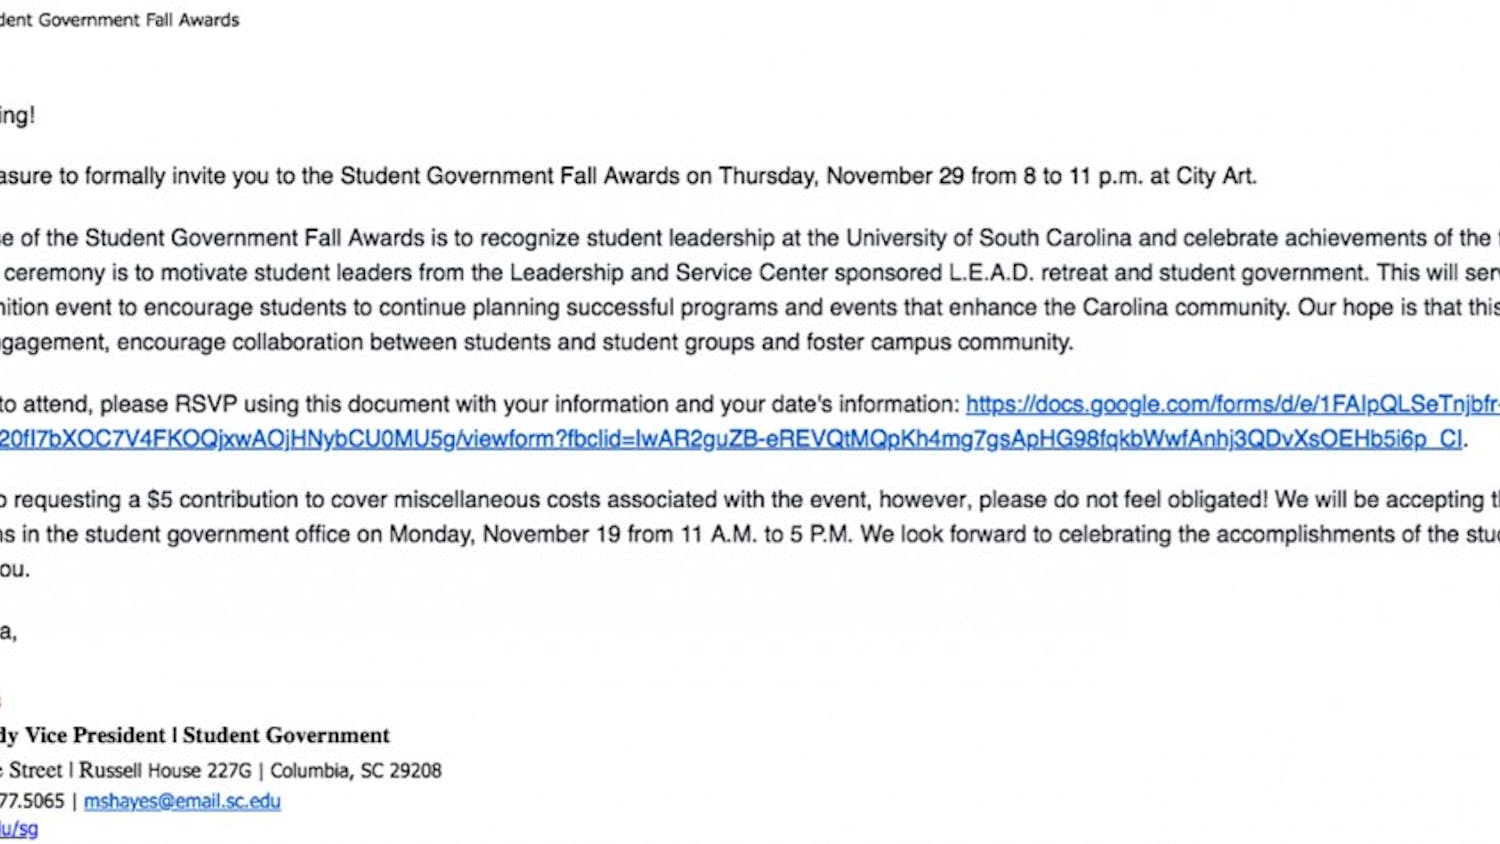 Mills' Student Government Fall Awards RSVP email.